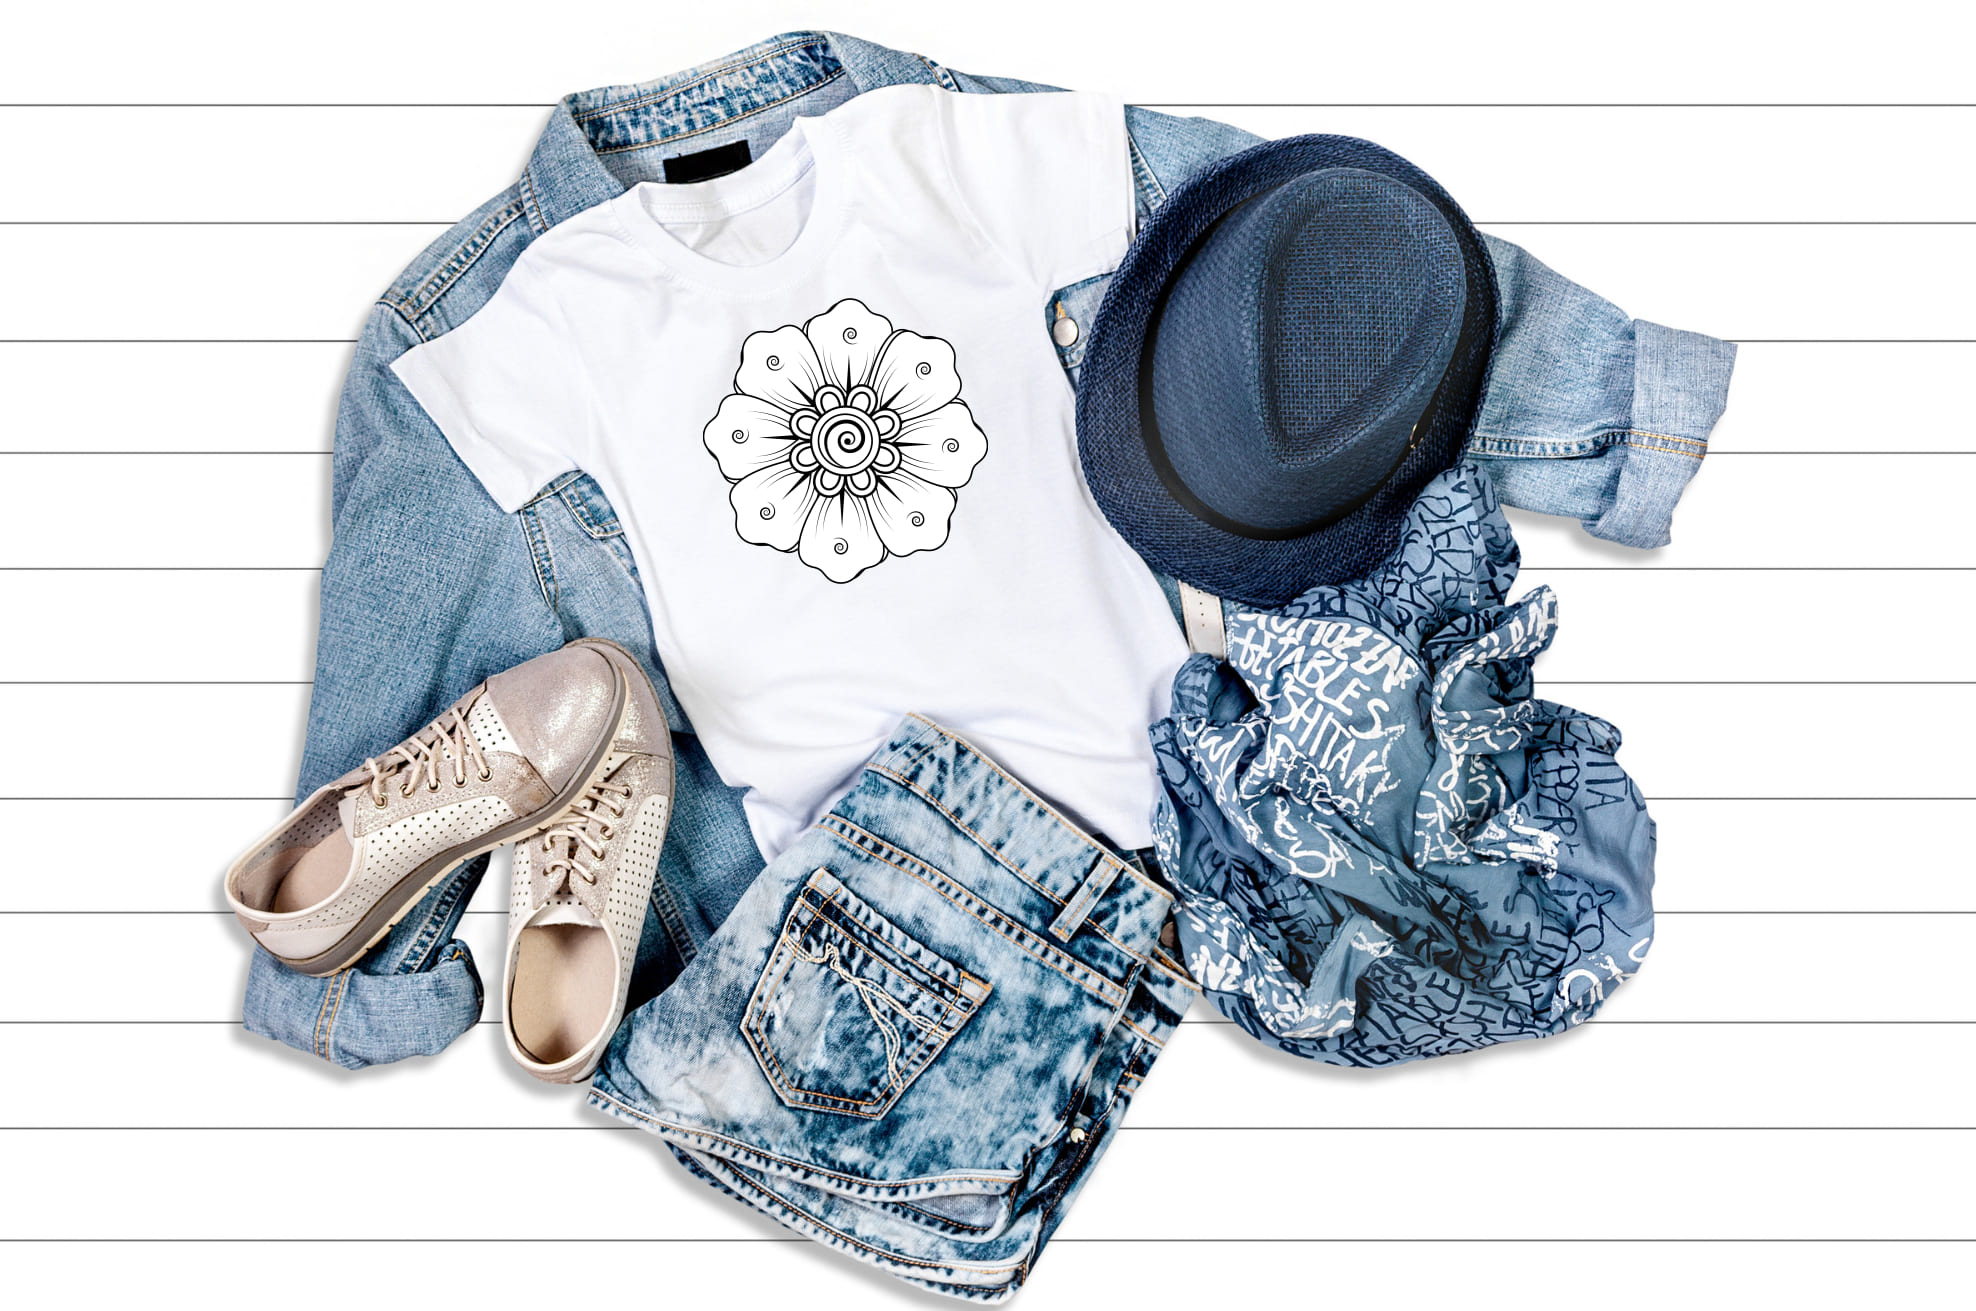 Cool jeans look and white t-shirt with the mandala.